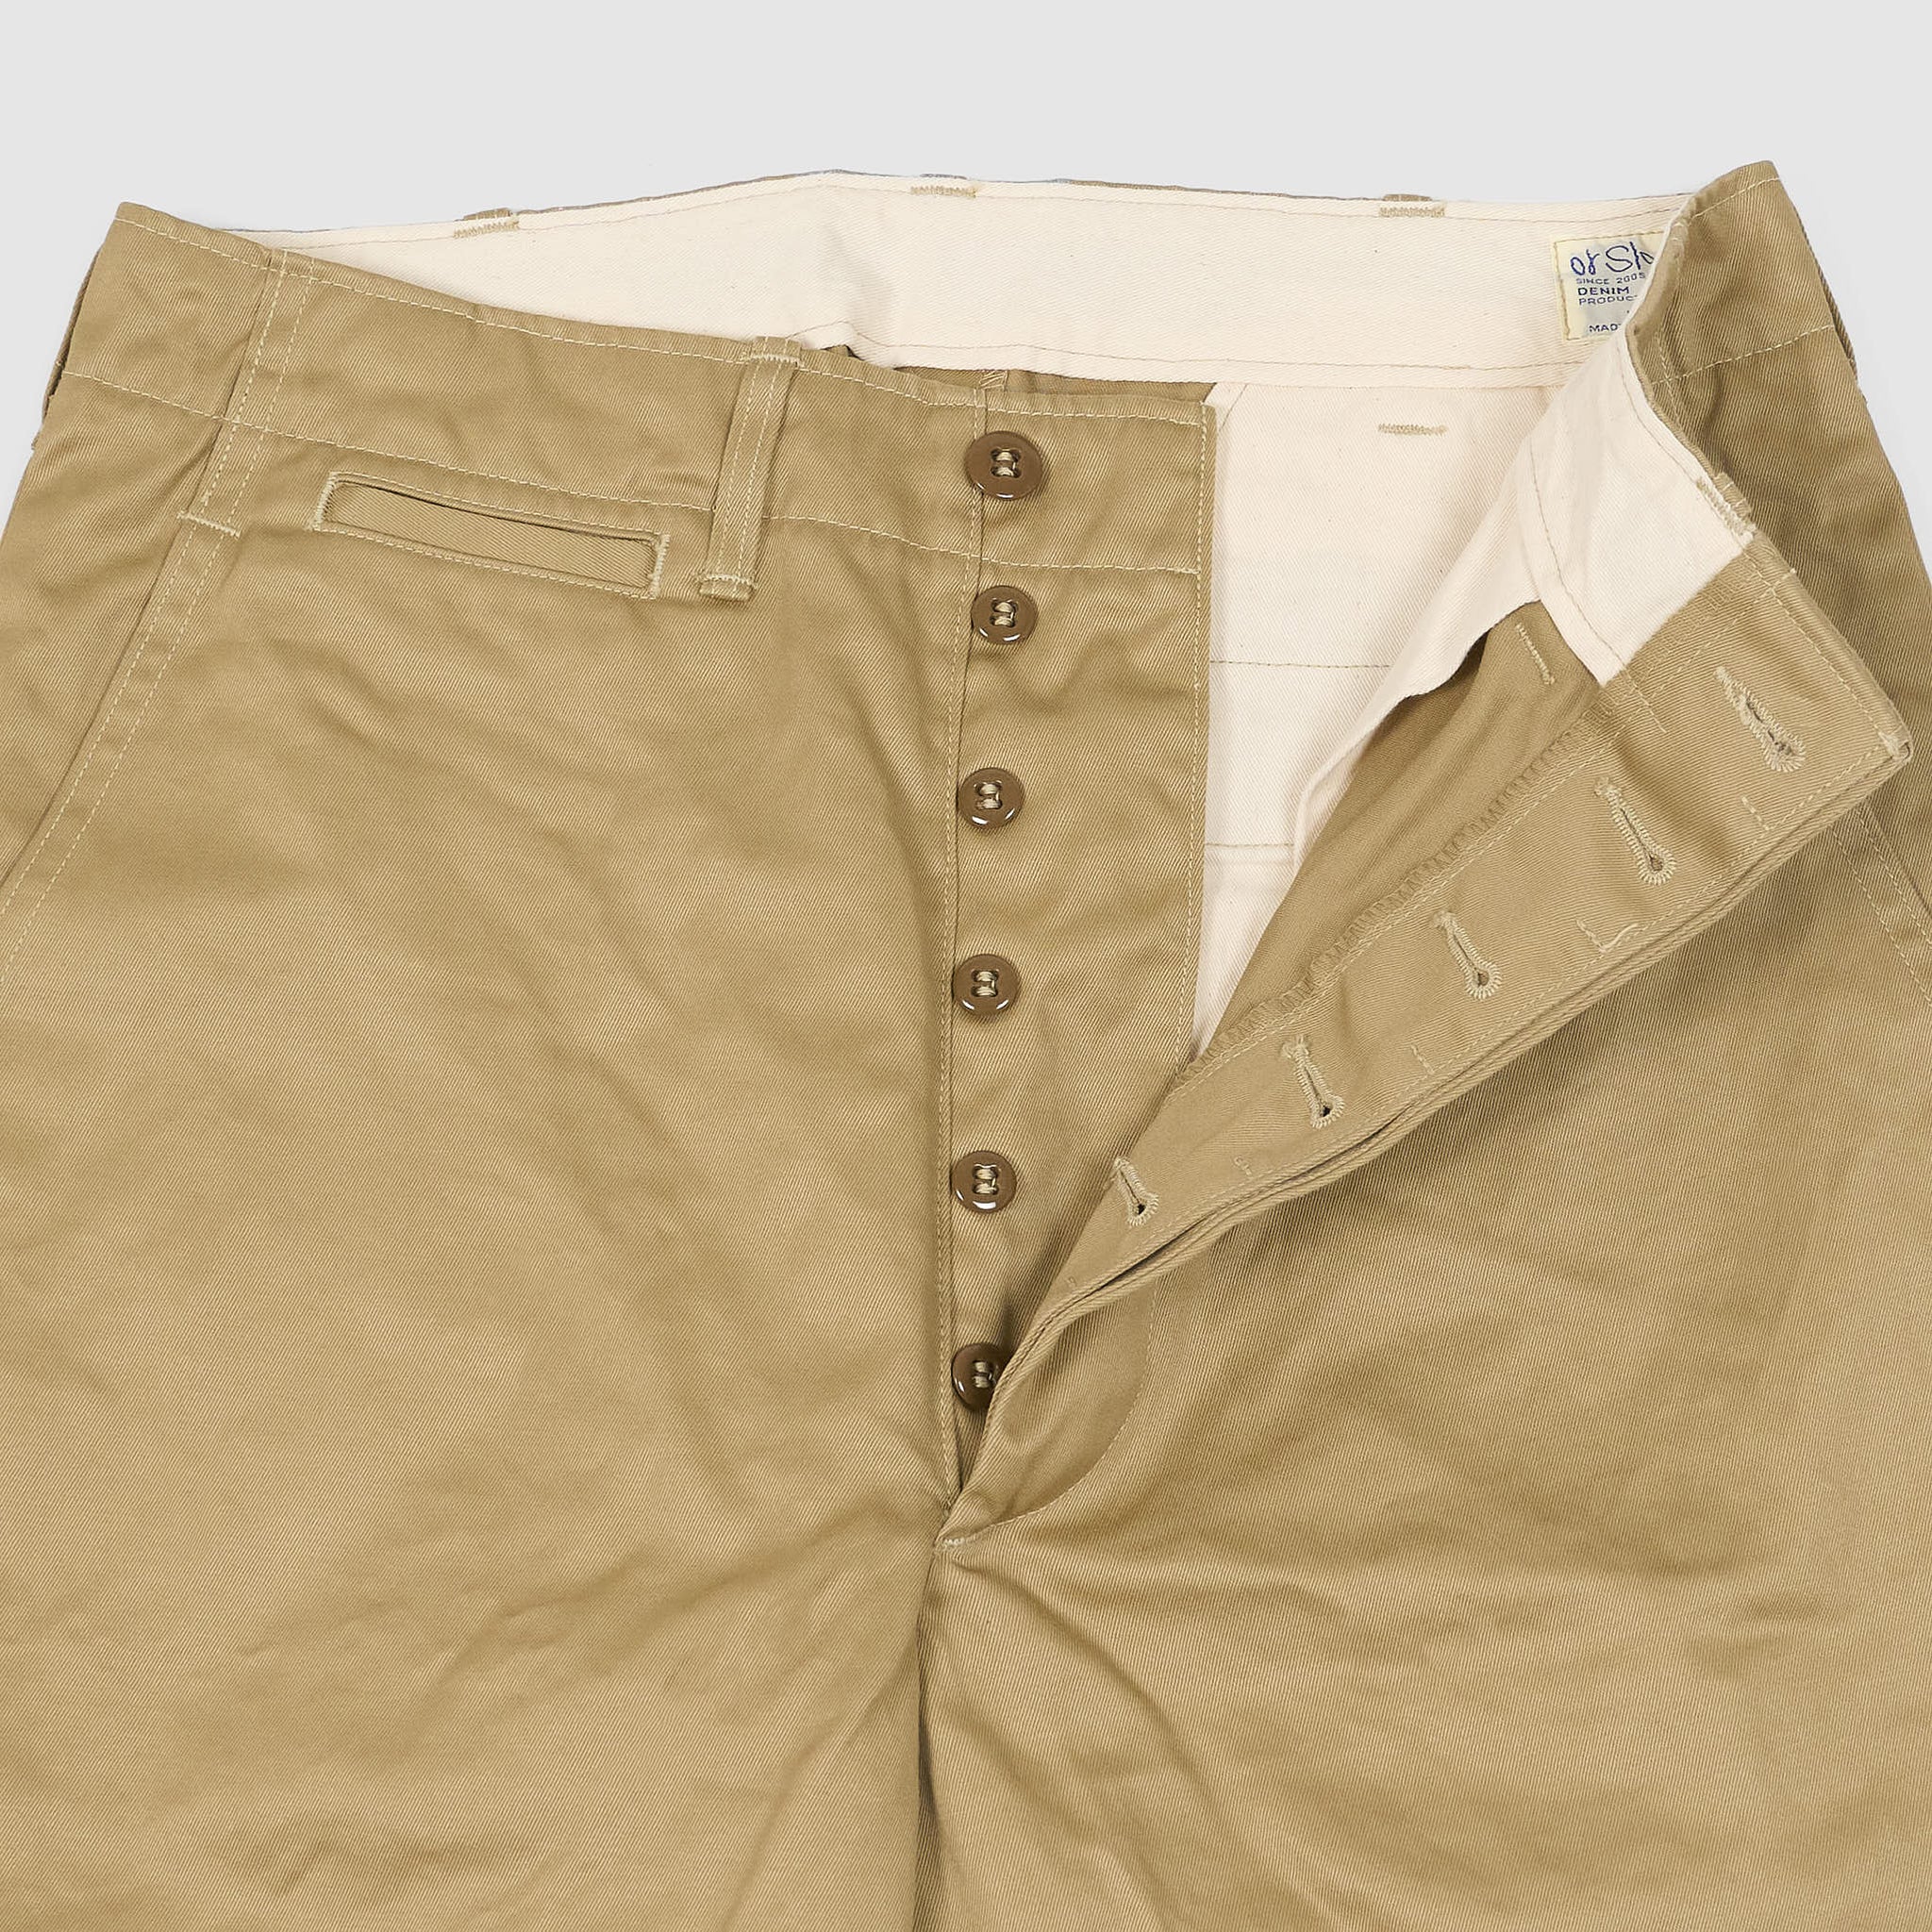 OrSlow Vintage Fit Army Chino Trousers - DeeCee style